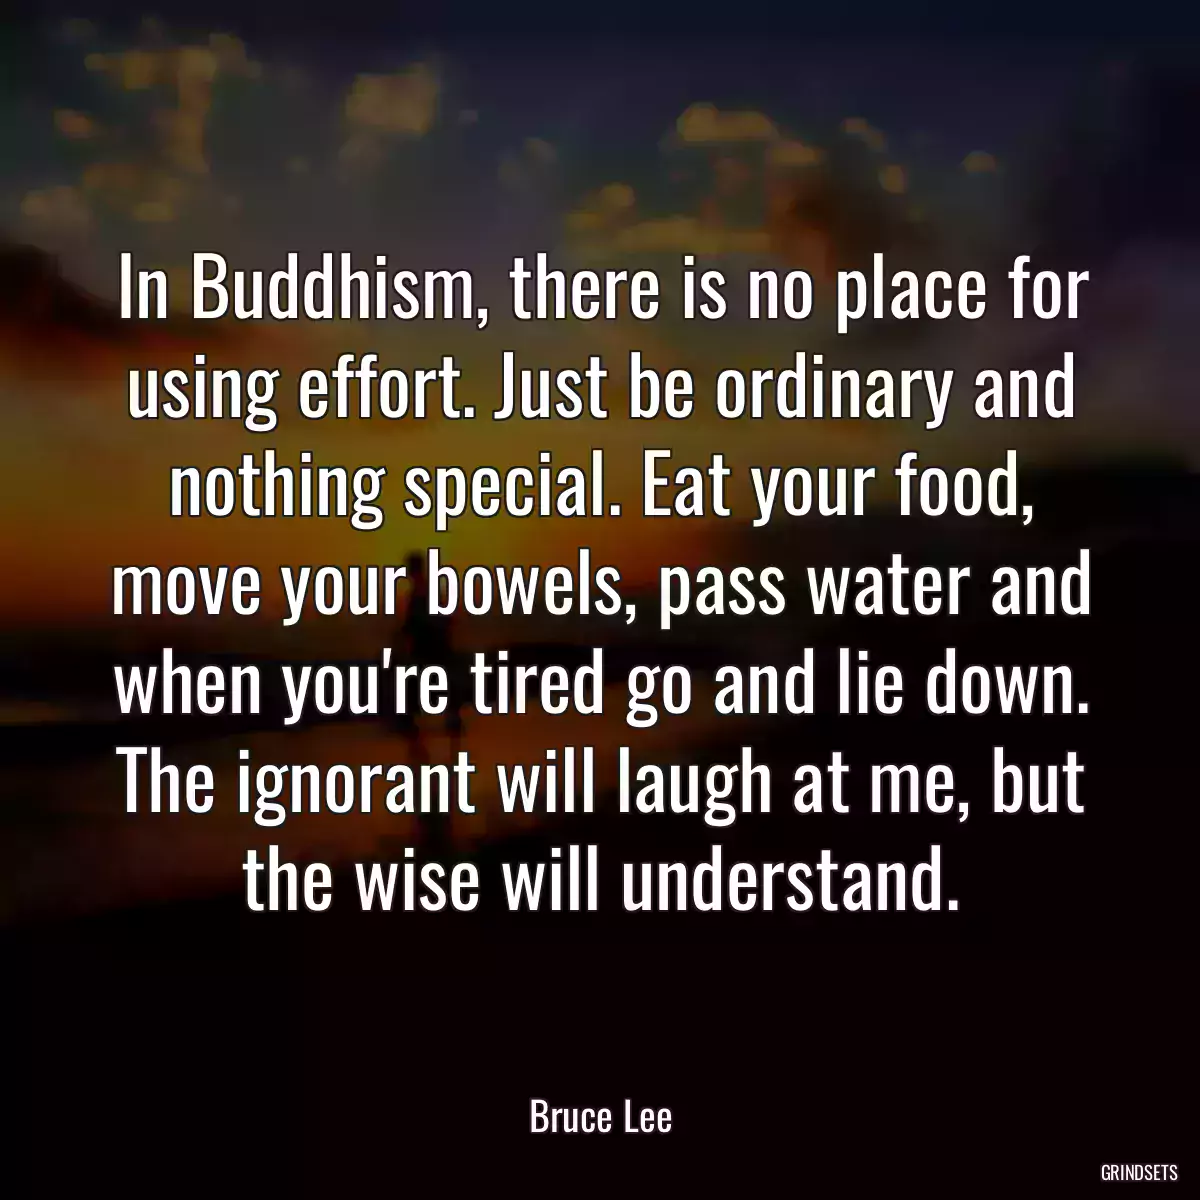 In Buddhism, there is no place for using effort. Just be ordinary and nothing special. Eat your food, move your bowels, pass water and when you\'re tired go and lie down. The ignorant will laugh at me, but the wise will understand.